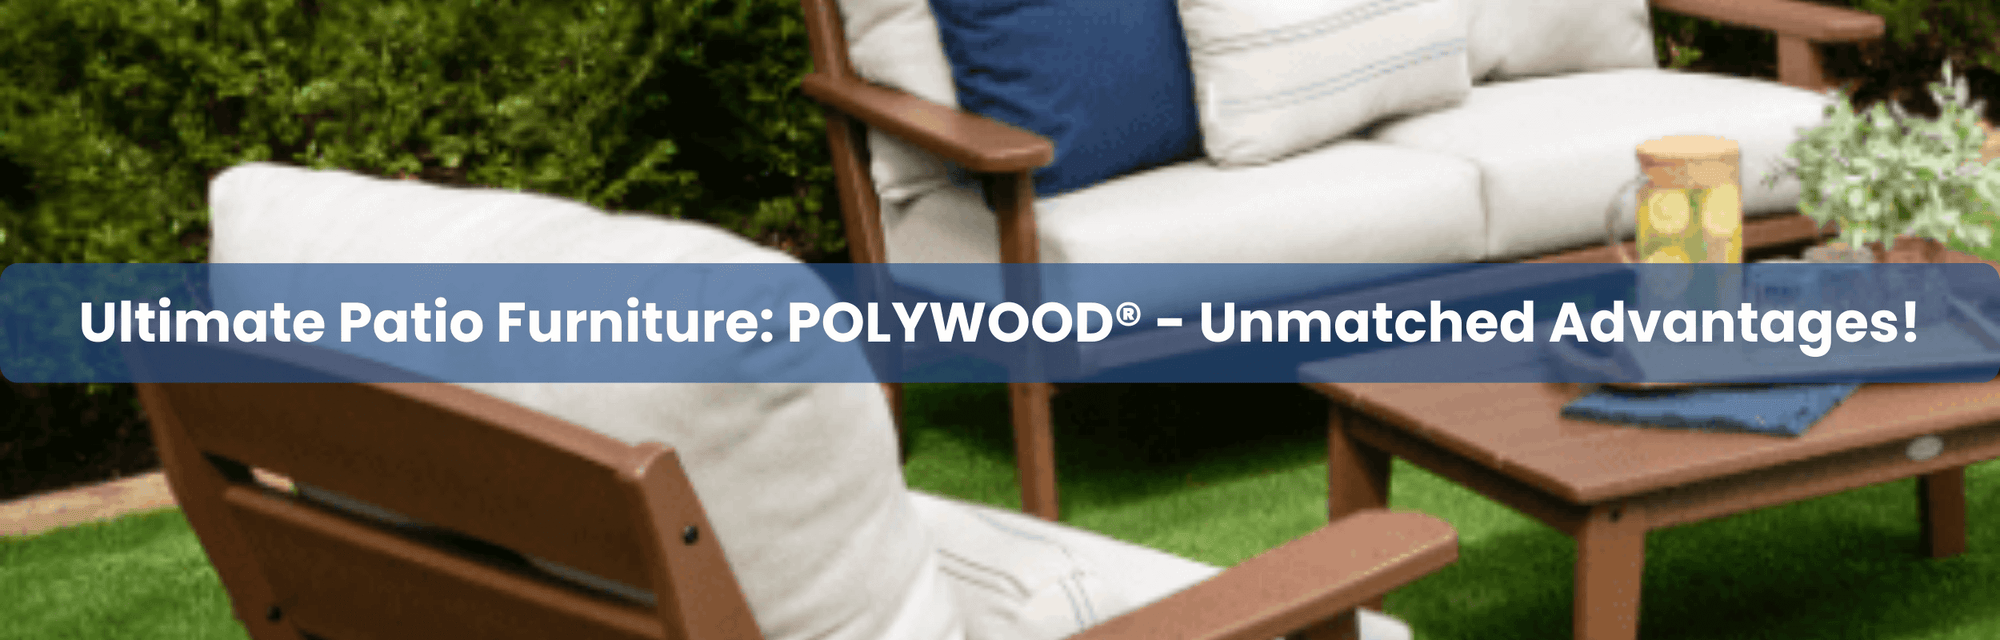 Discover the Ultimate Patio Furniture: POLYWOOD® - Unmatched Advantages!